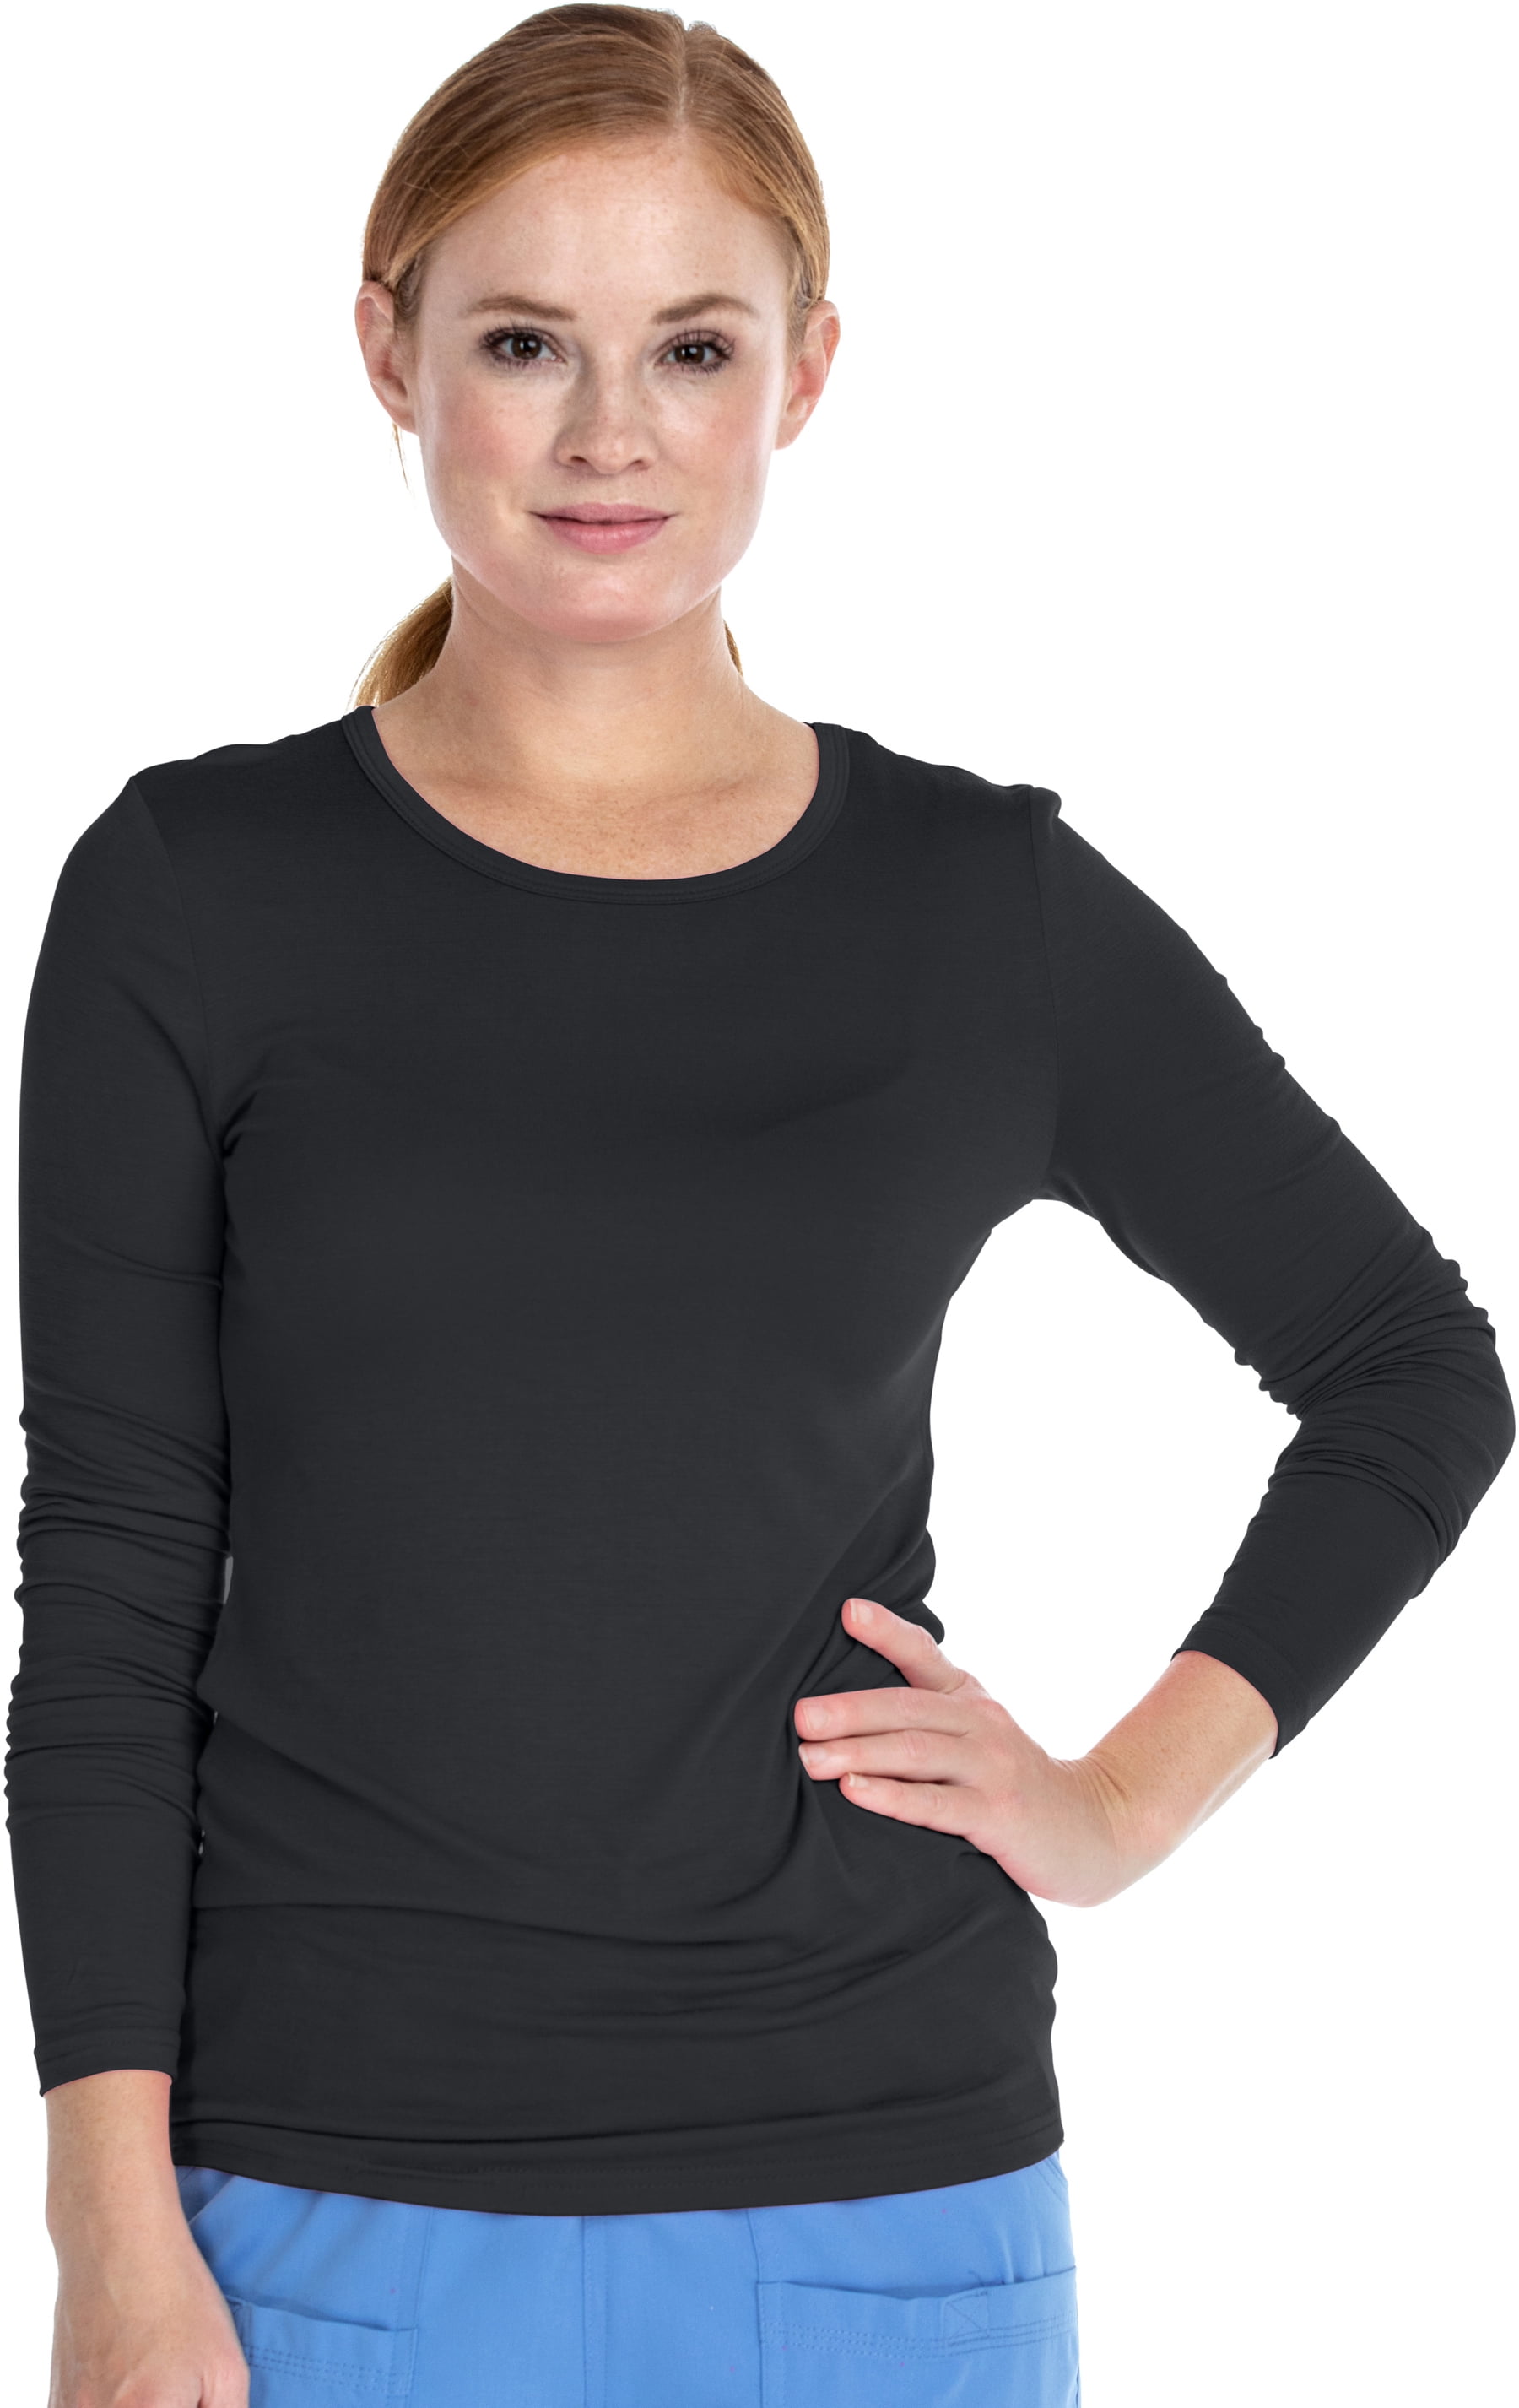 MediChic Scrubs Stretch Comfy Under Scrub T-Shirt, Available in Five ...